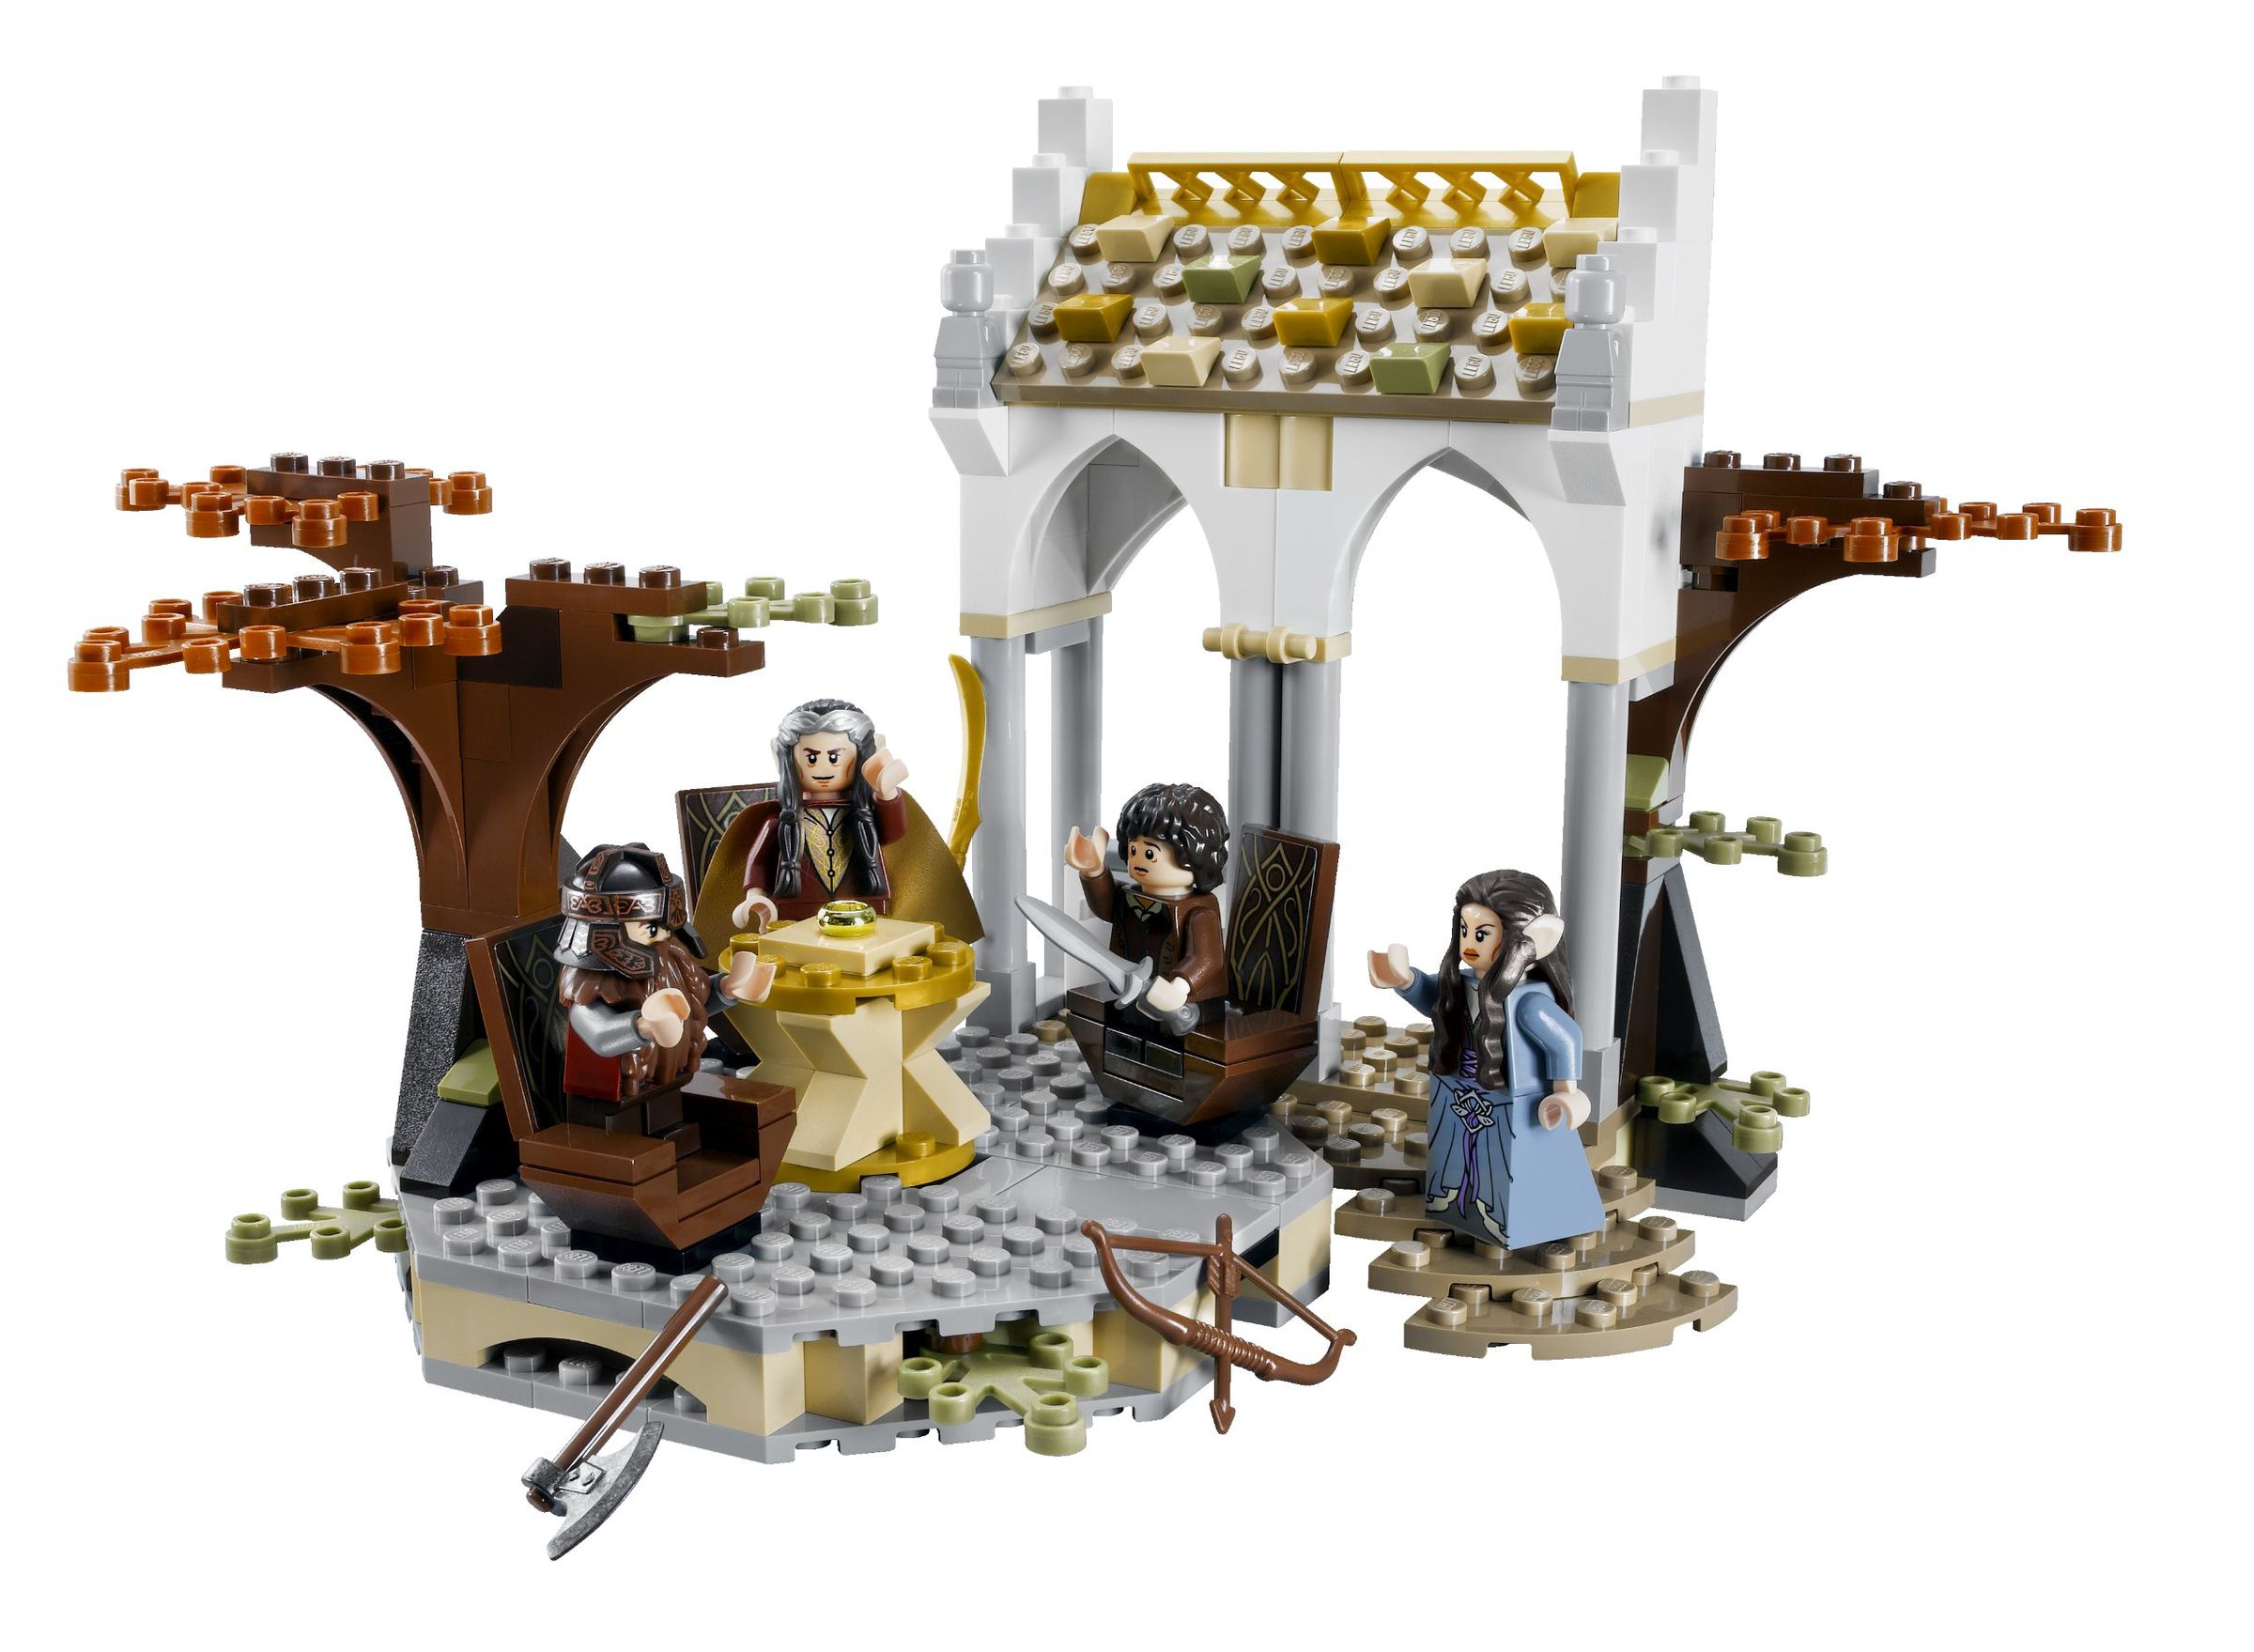 Image of Lego Gimli, Elrond, Frodo, and Arwen sitting in an unimpressive courtyard.